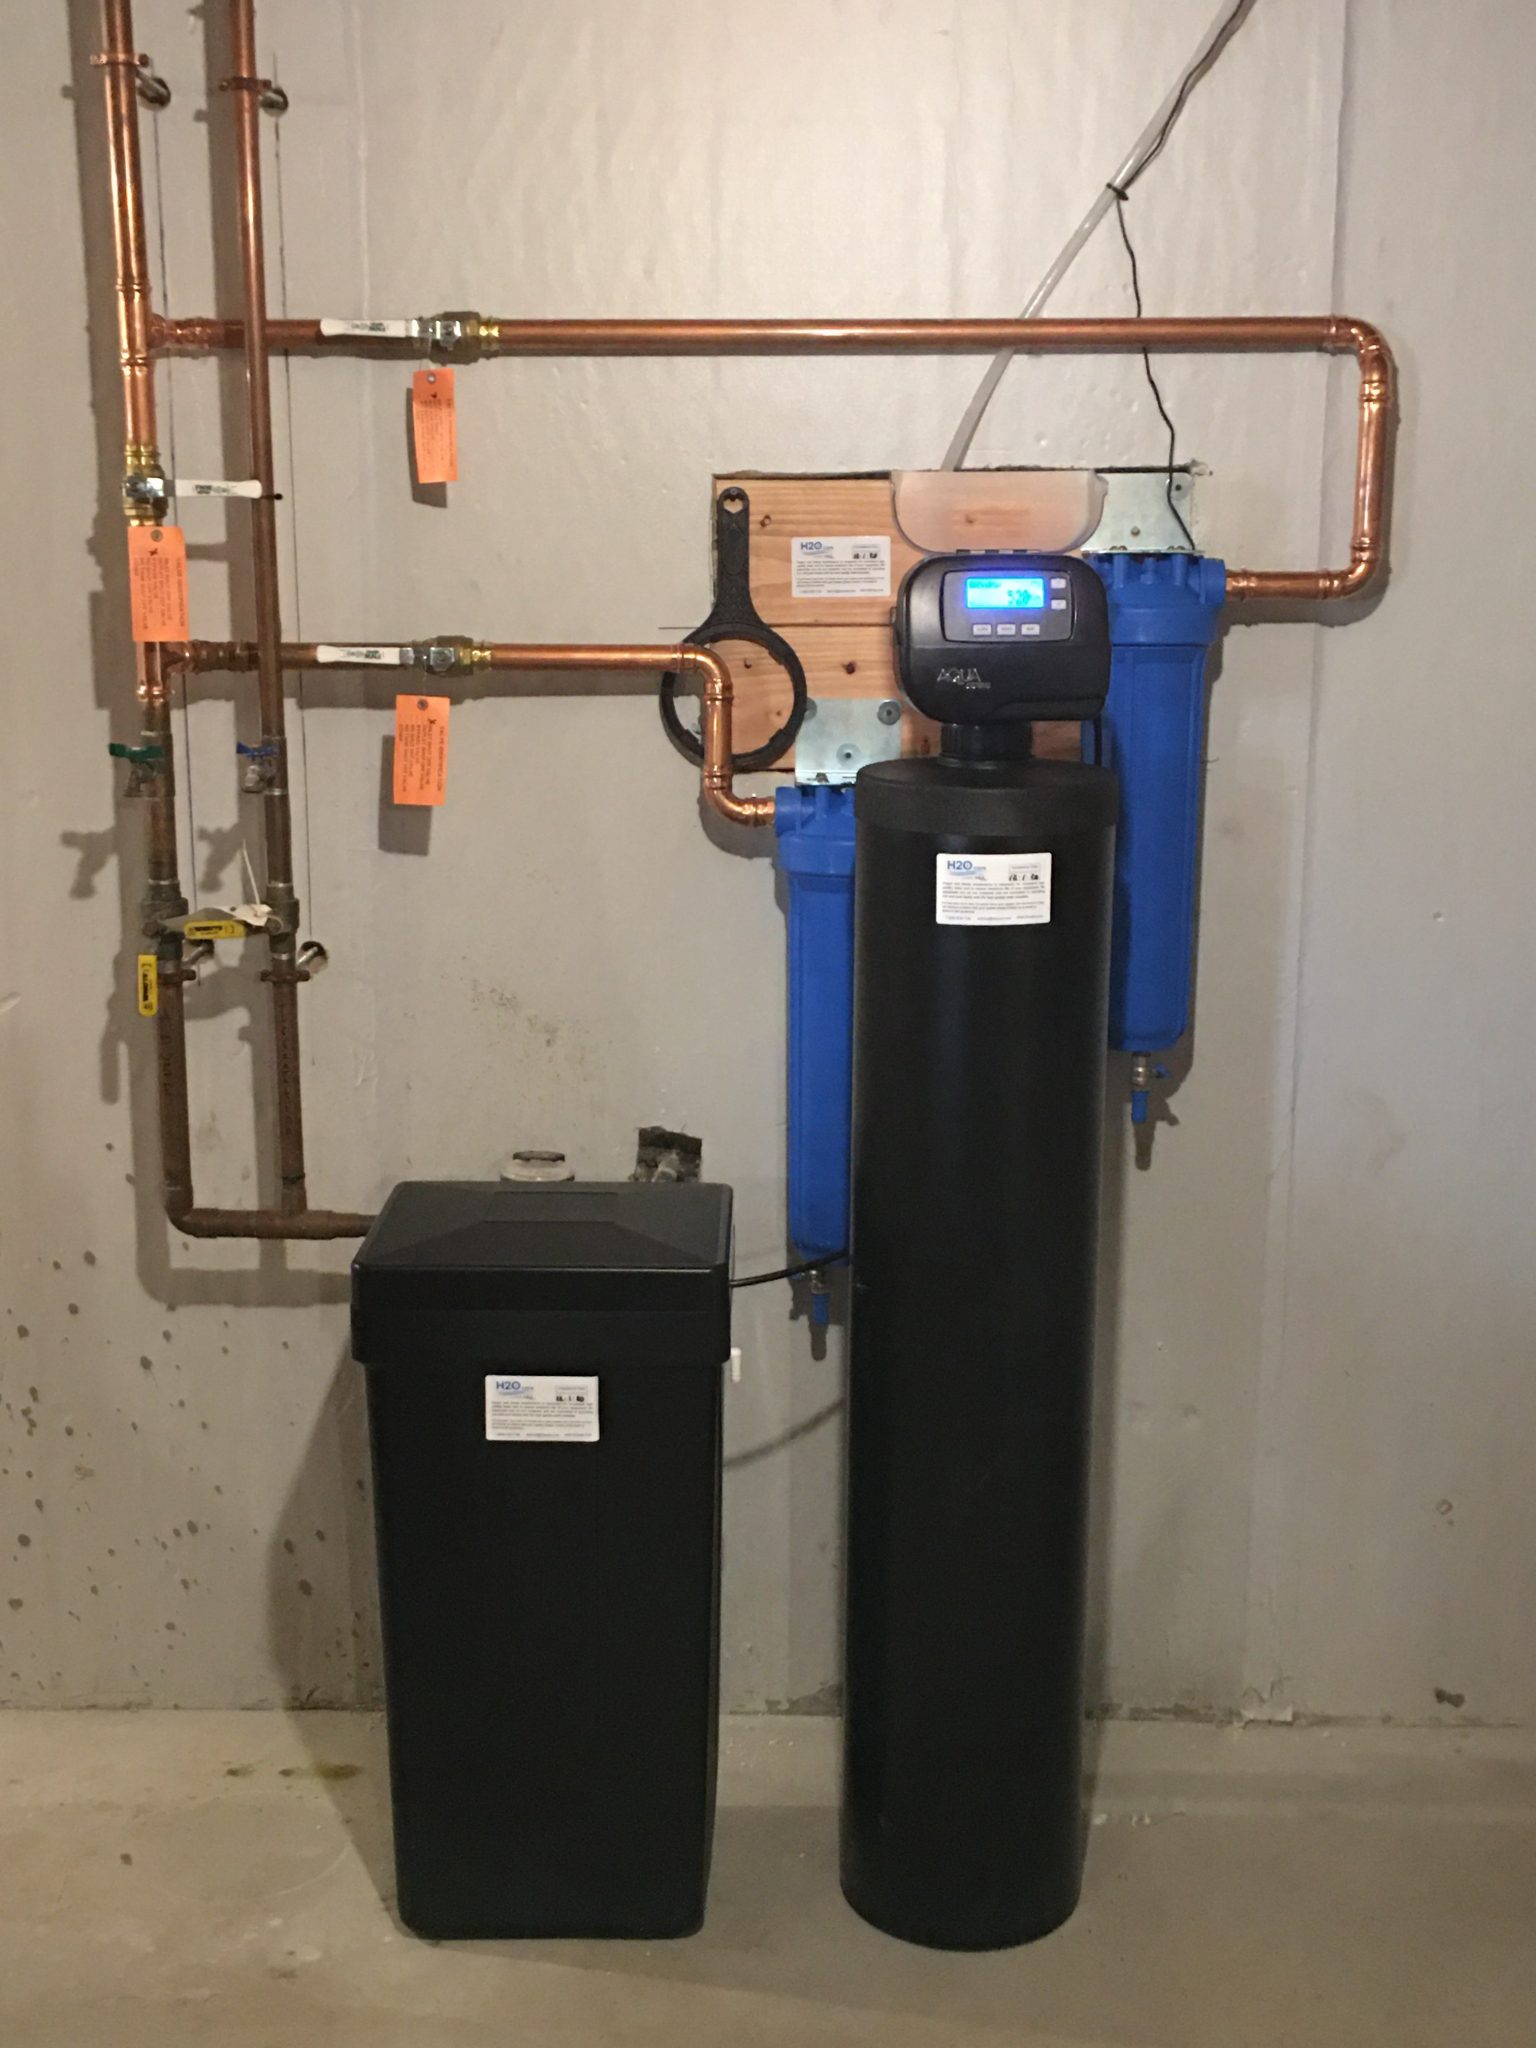 1 1/2 cubic feet, high efficiency Water Softener with 20 inch, "Big Blue" graded density 5-micron sediment filter and activated carbon filter. Installed on public water supply with hard water, sediment & heavy chlorine.